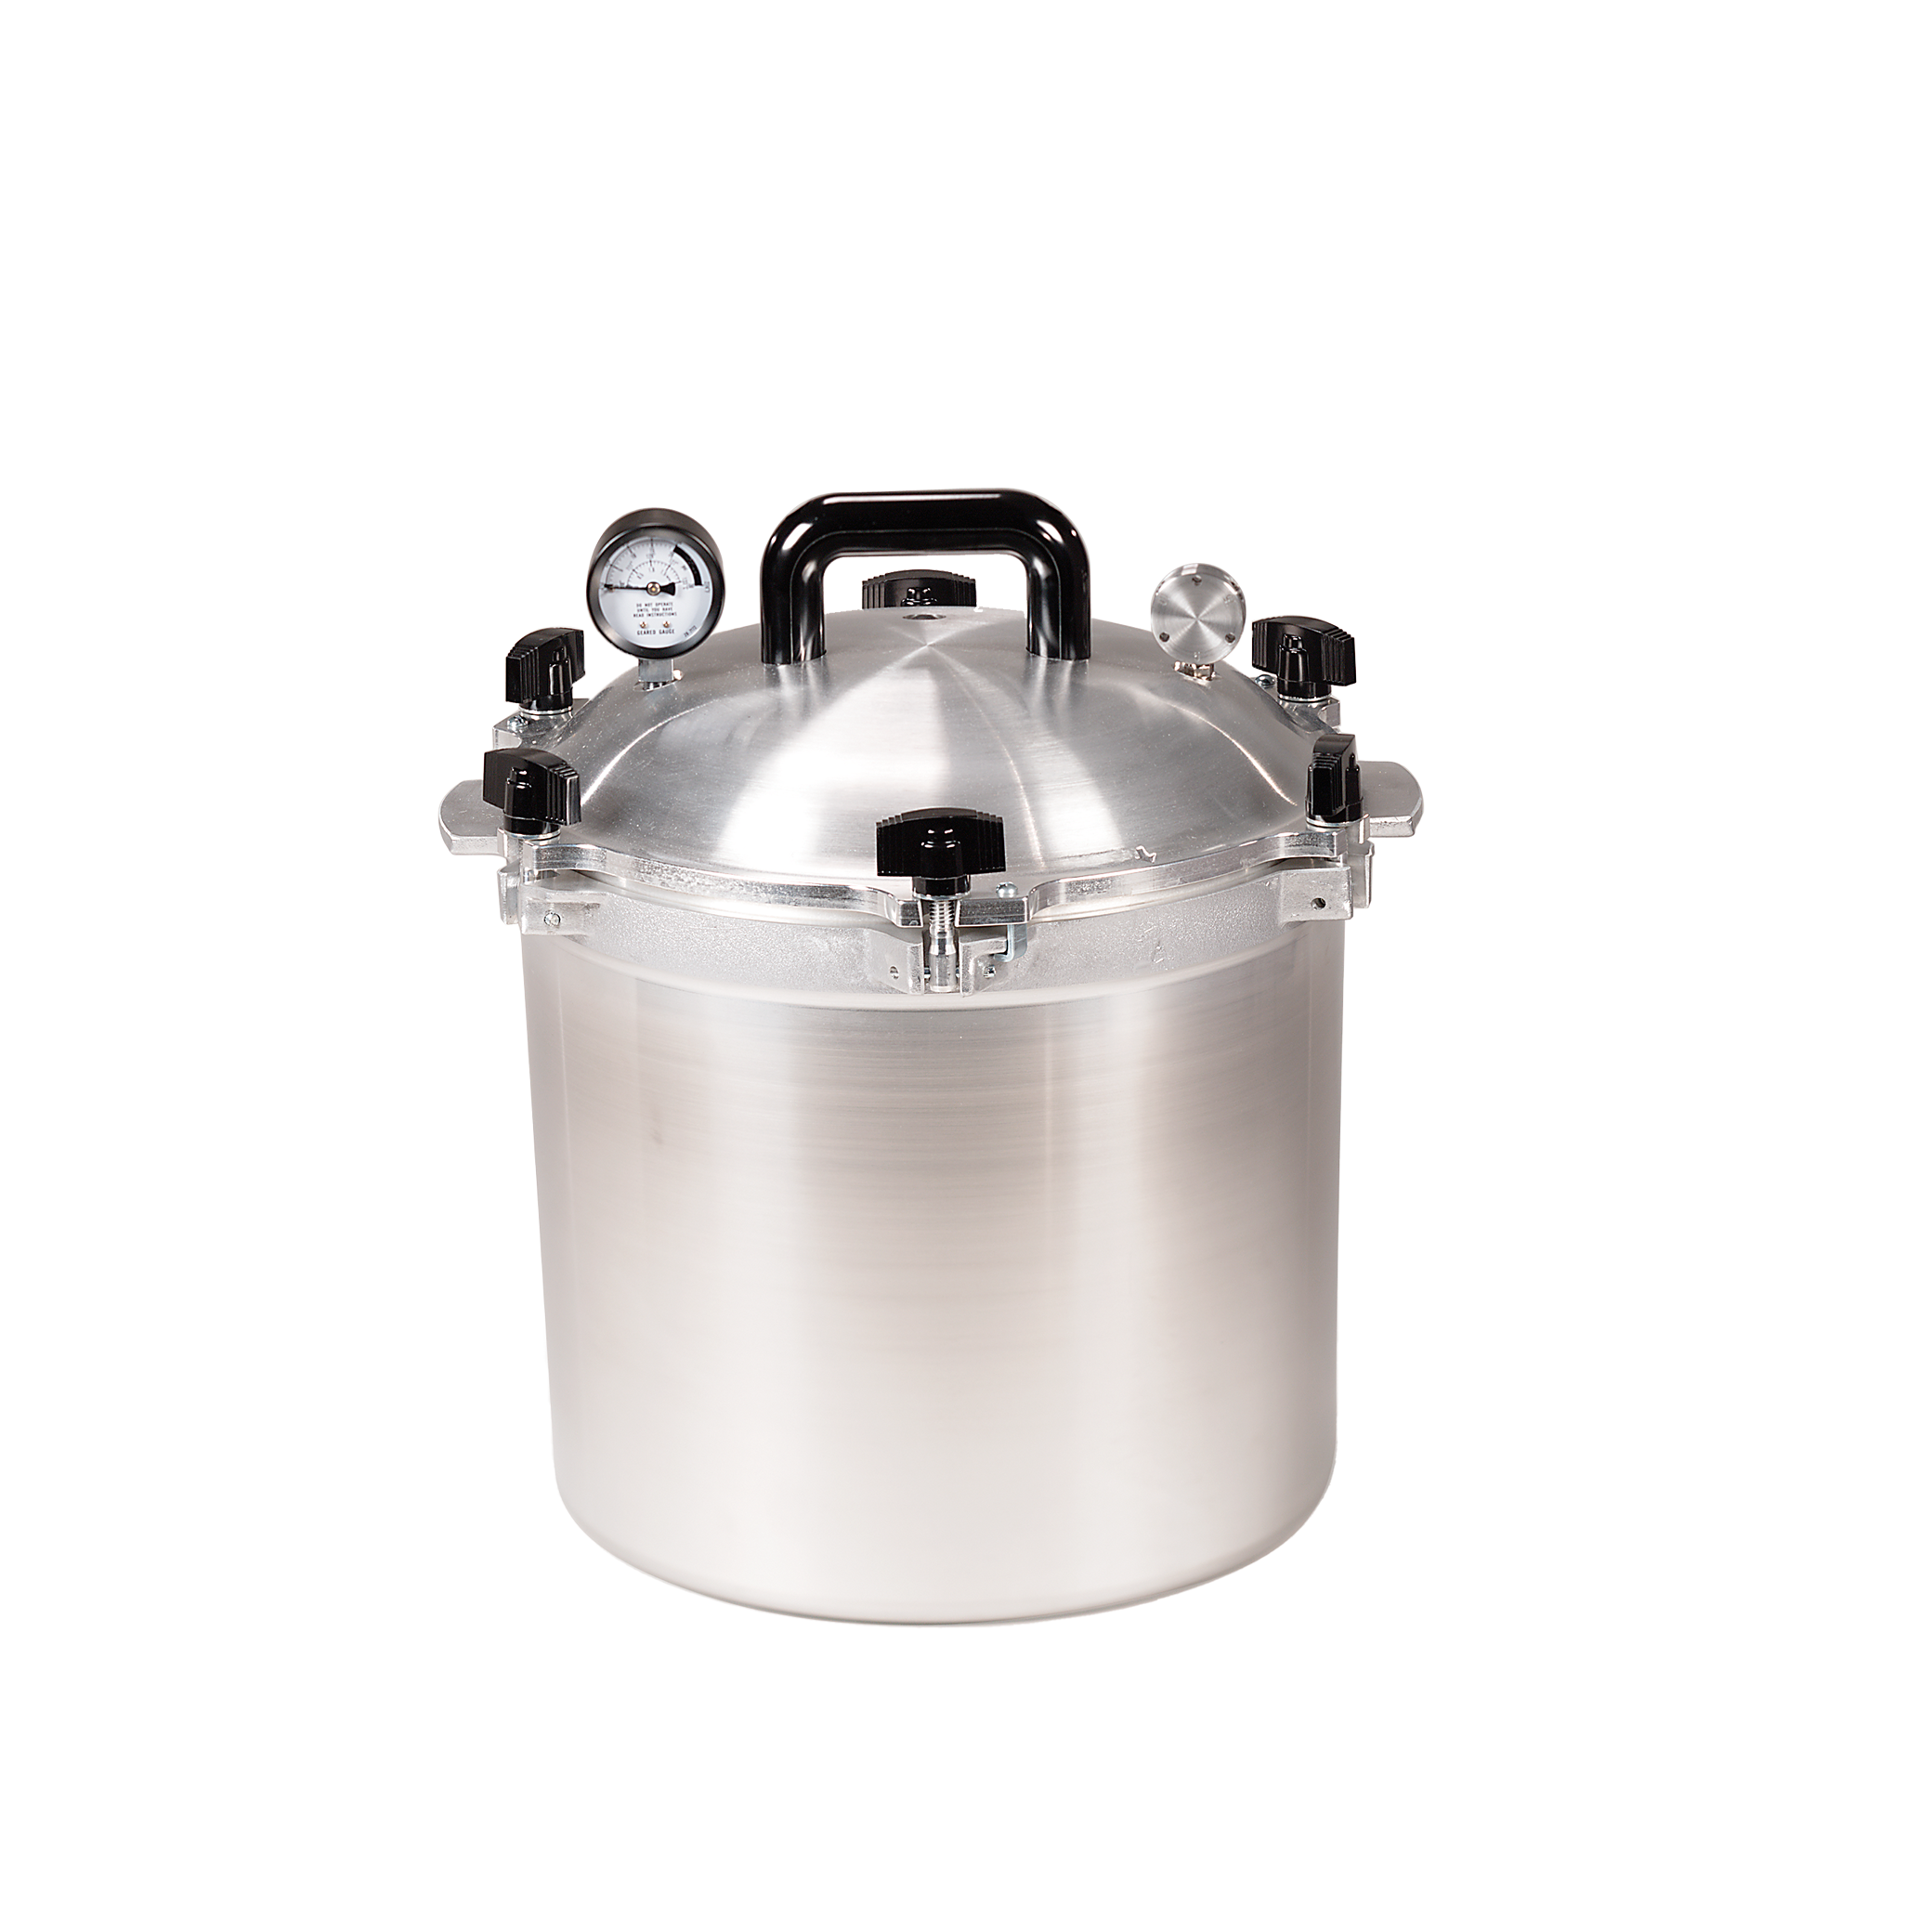 https://www.leftcoastwholesale.com/wp-content/uploads/2023/06/All-American-921-Pressure-Cooker.png